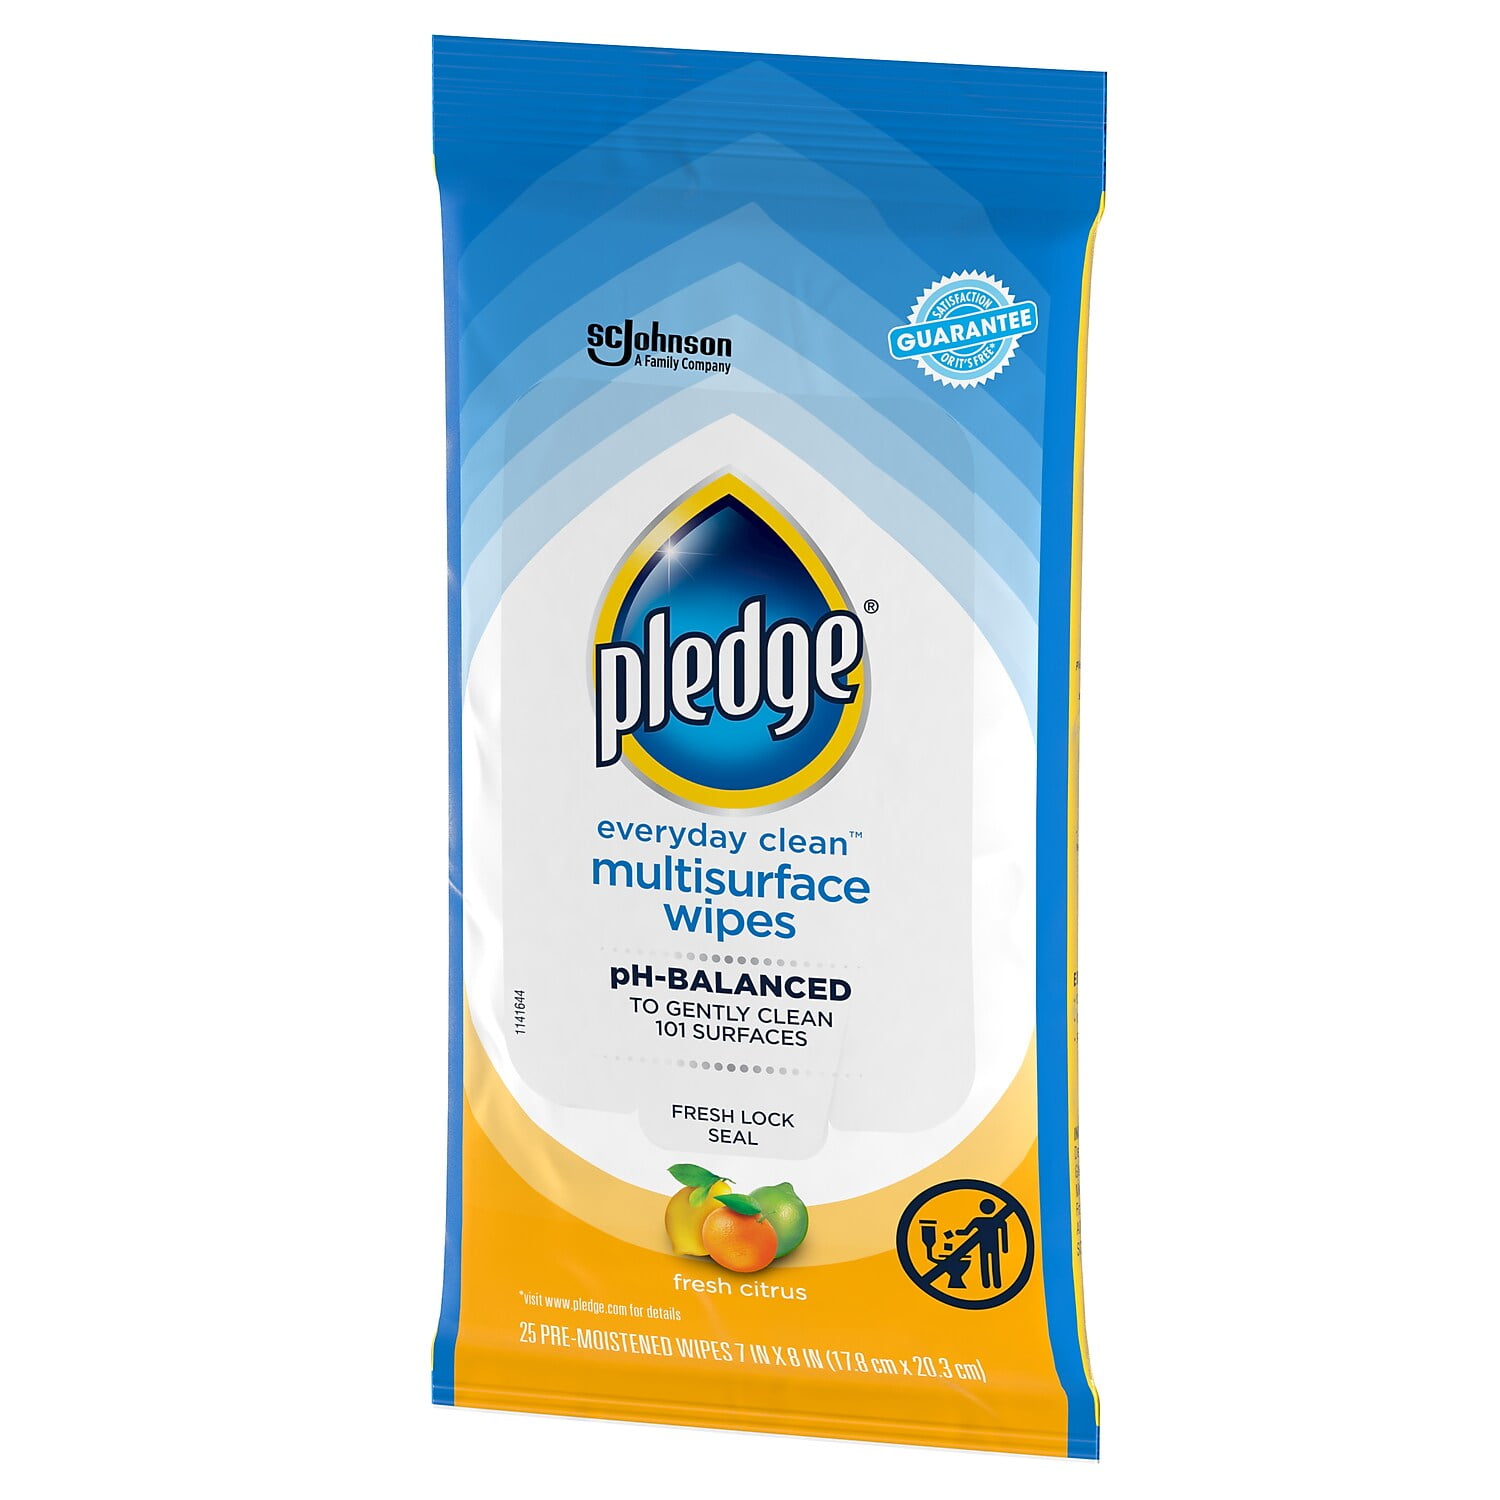 Pledge No Scent Multi-Surface Cleaner Wipes 25 ct - Ace Hardware